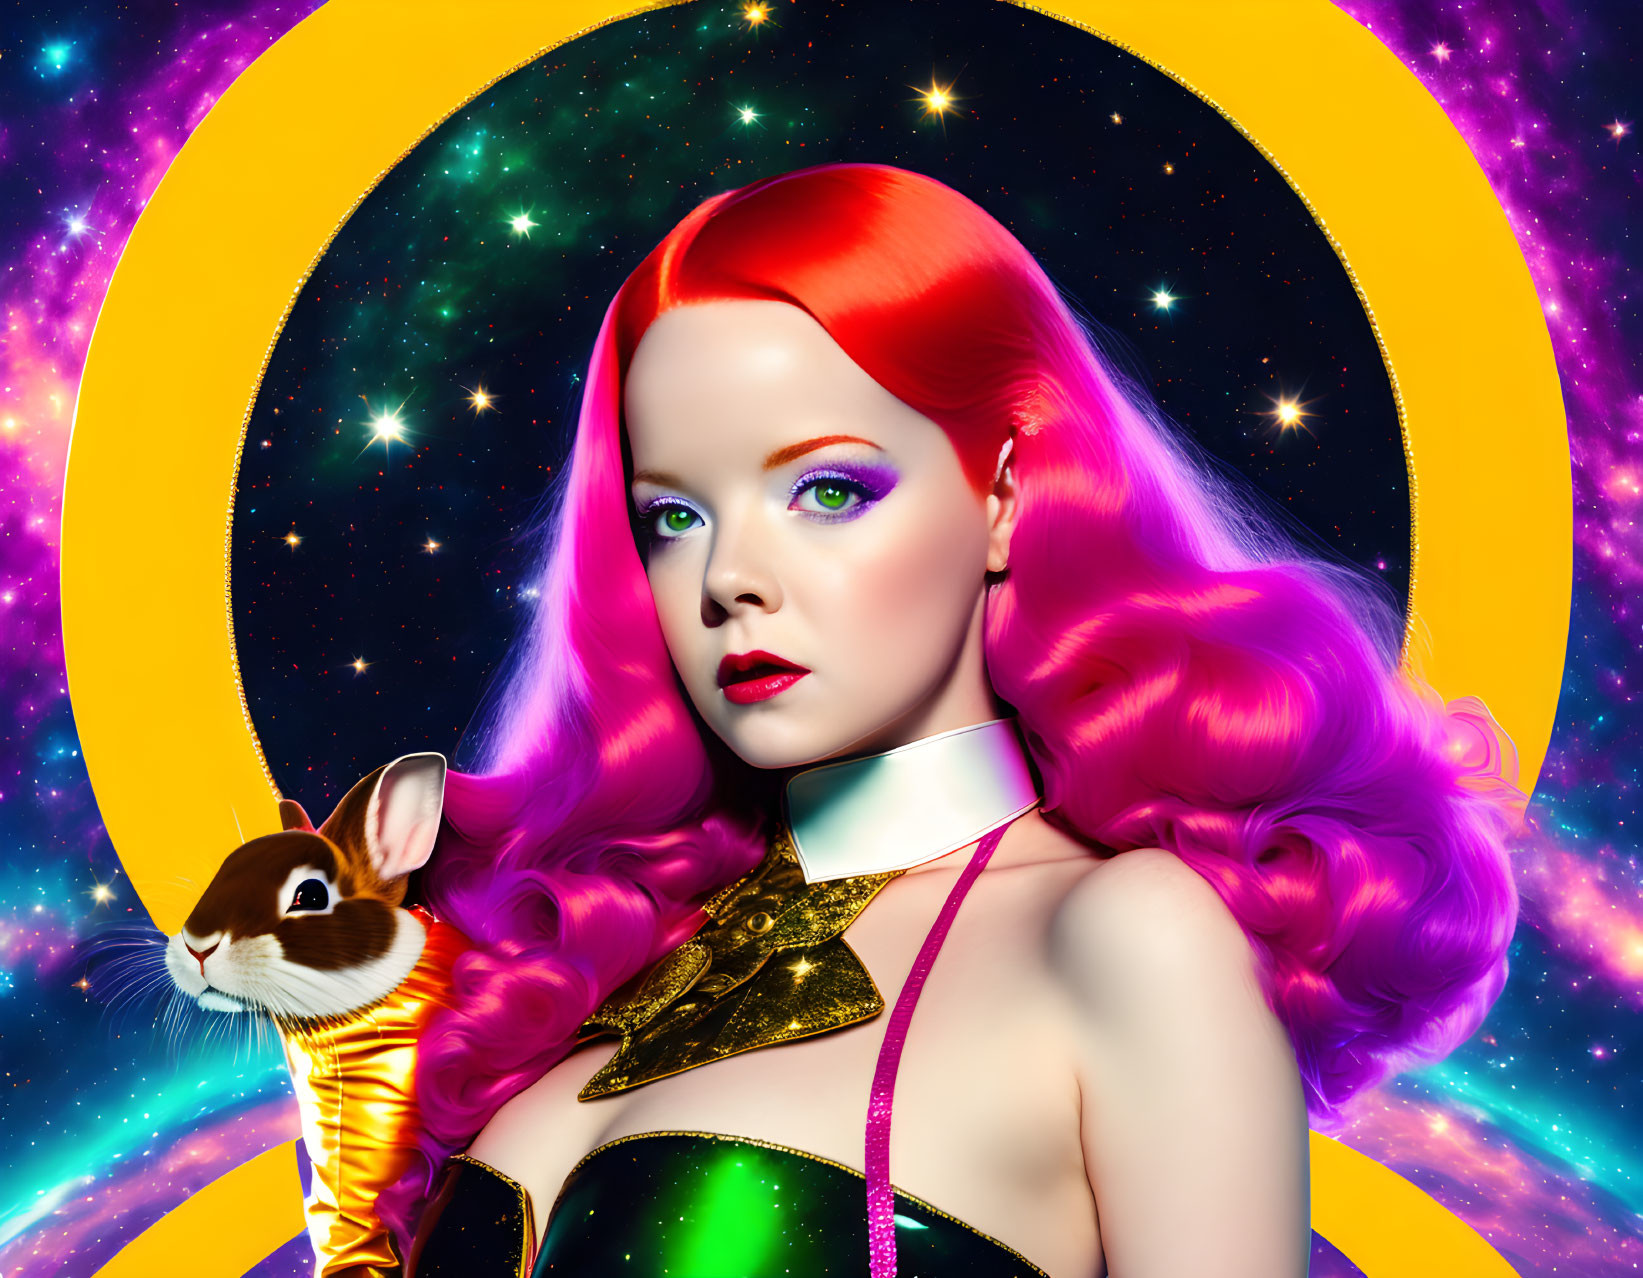 Vibrant pink hair woman with green eyes and chipmunk in cosmic setting